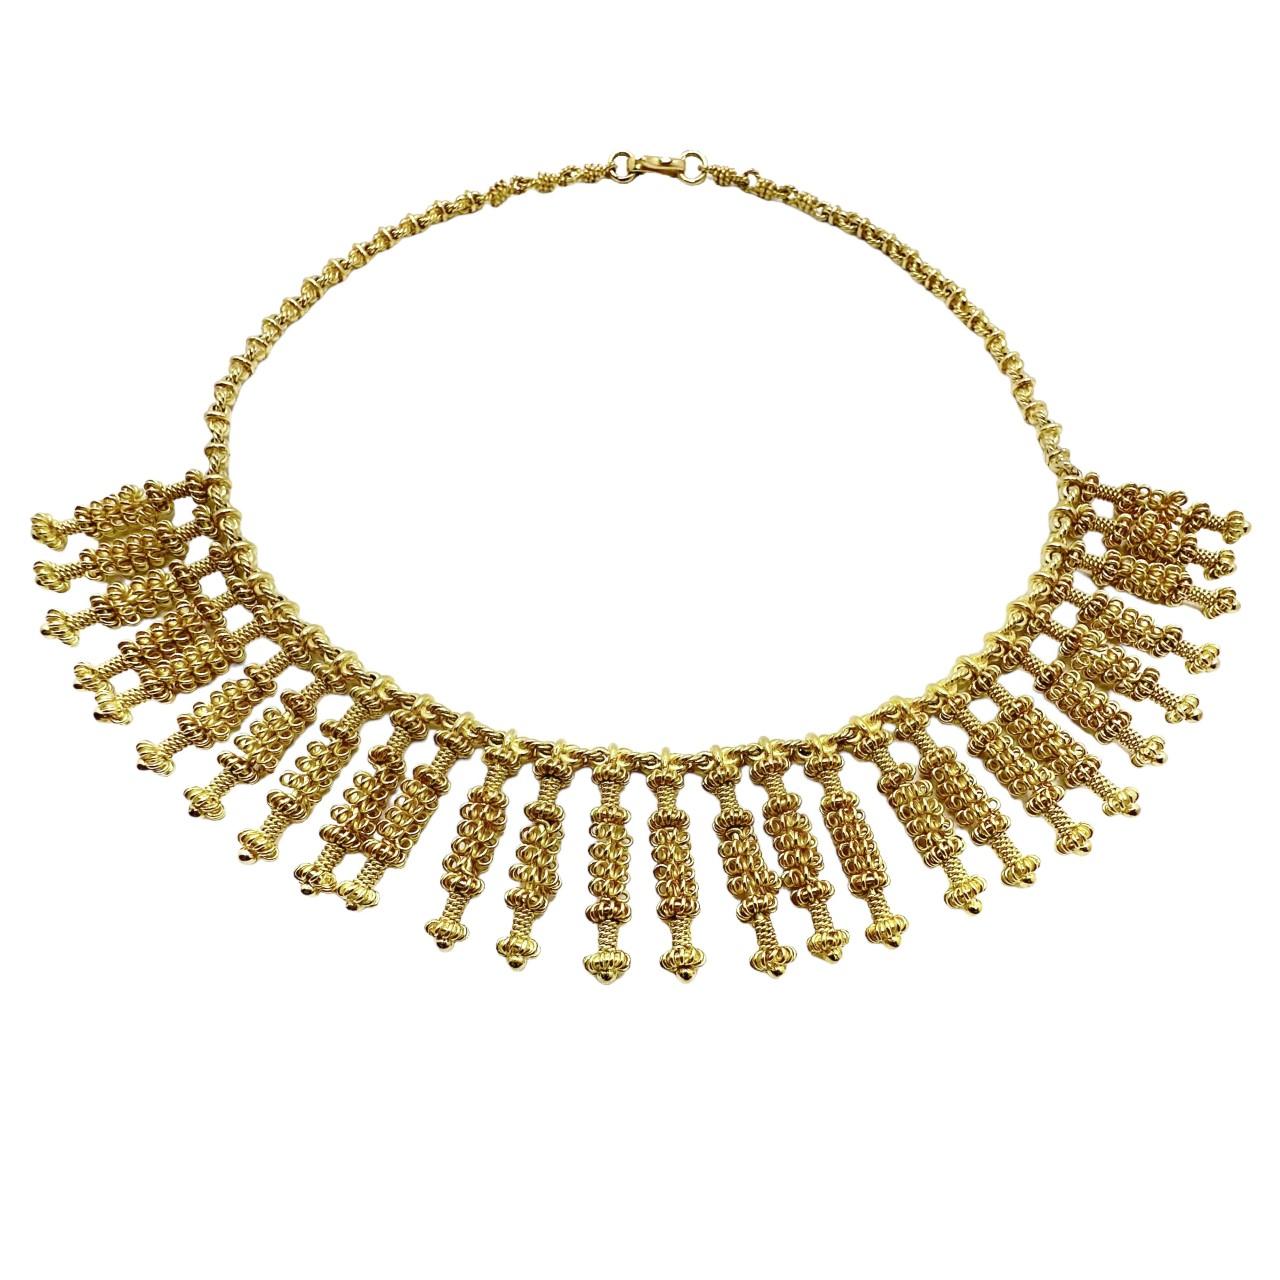 This 18k yellow gold vintage necklace is truly an example of the very best in intricate hand done filigree work. It is comprised of a modified rope link chain from which are suspended a total of seventeen hand filigree wrapped columns, each